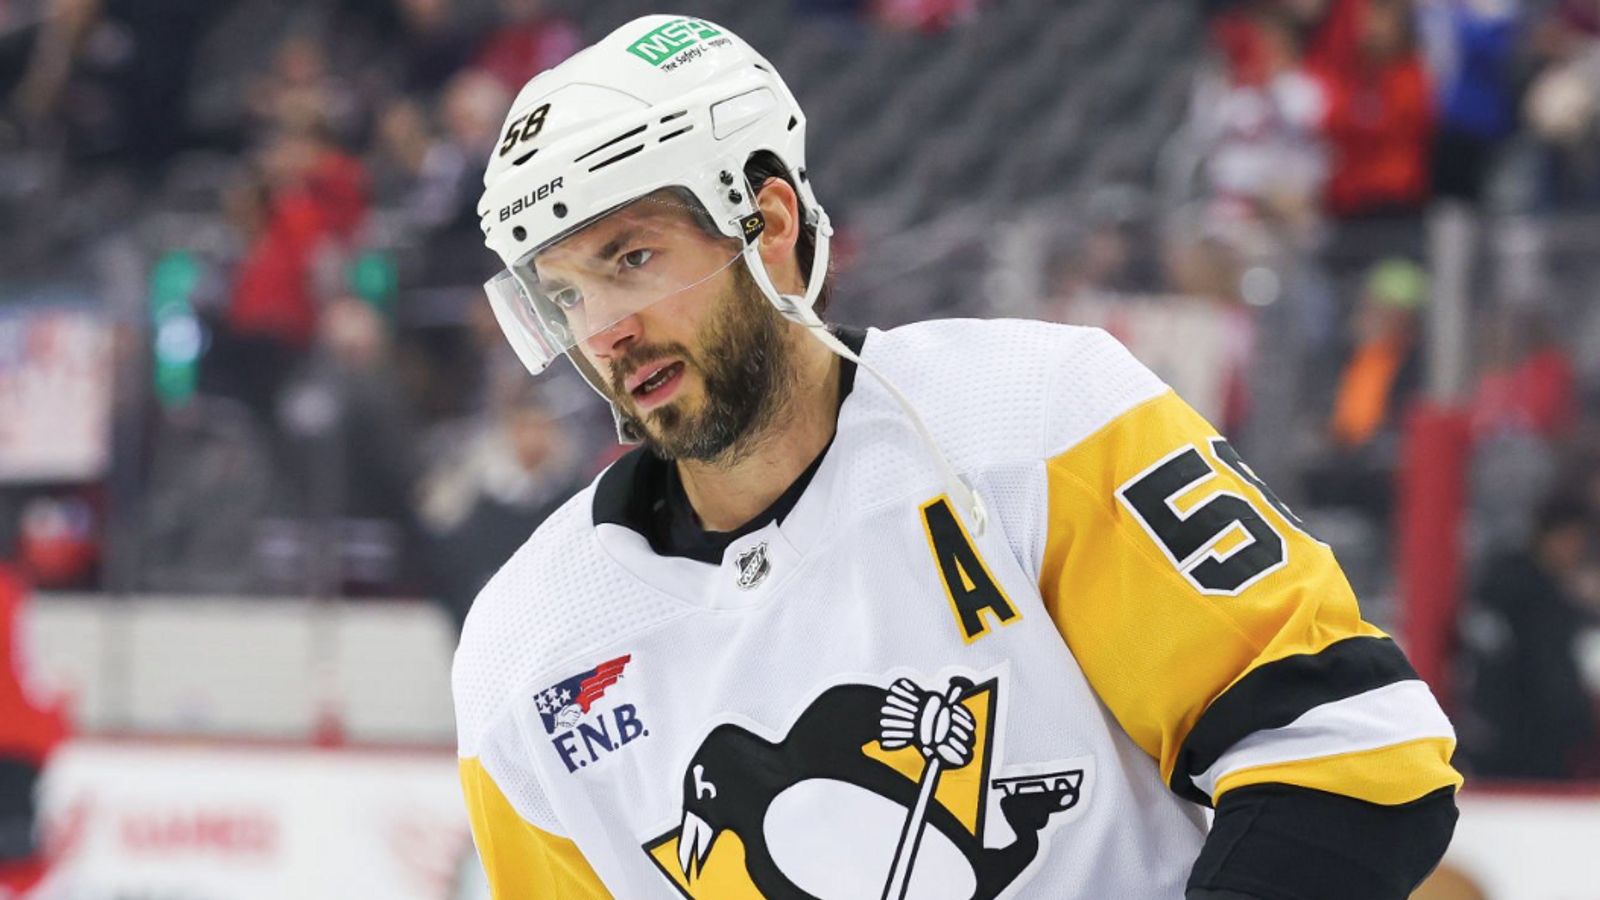 Kris Letang, Matt Nieto and John Ludvig all underwent successful surgeries in the weeks since the Penguins' season ended.